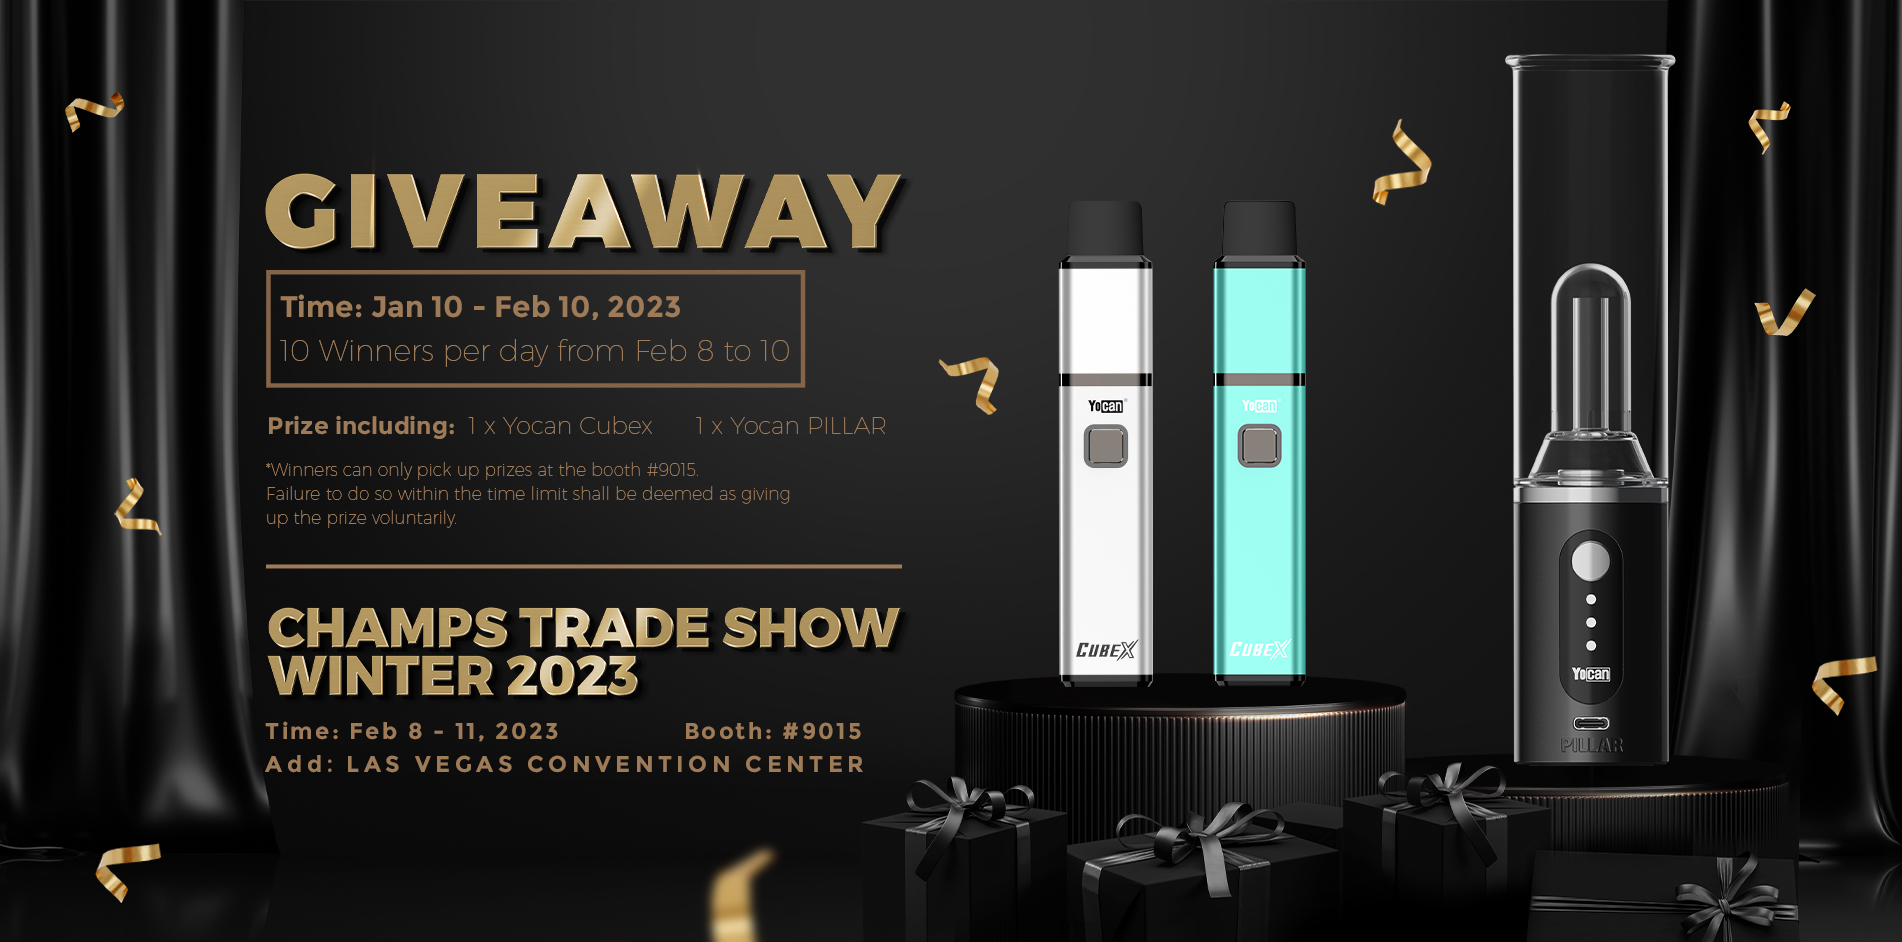 Yocan Cubex giveaway